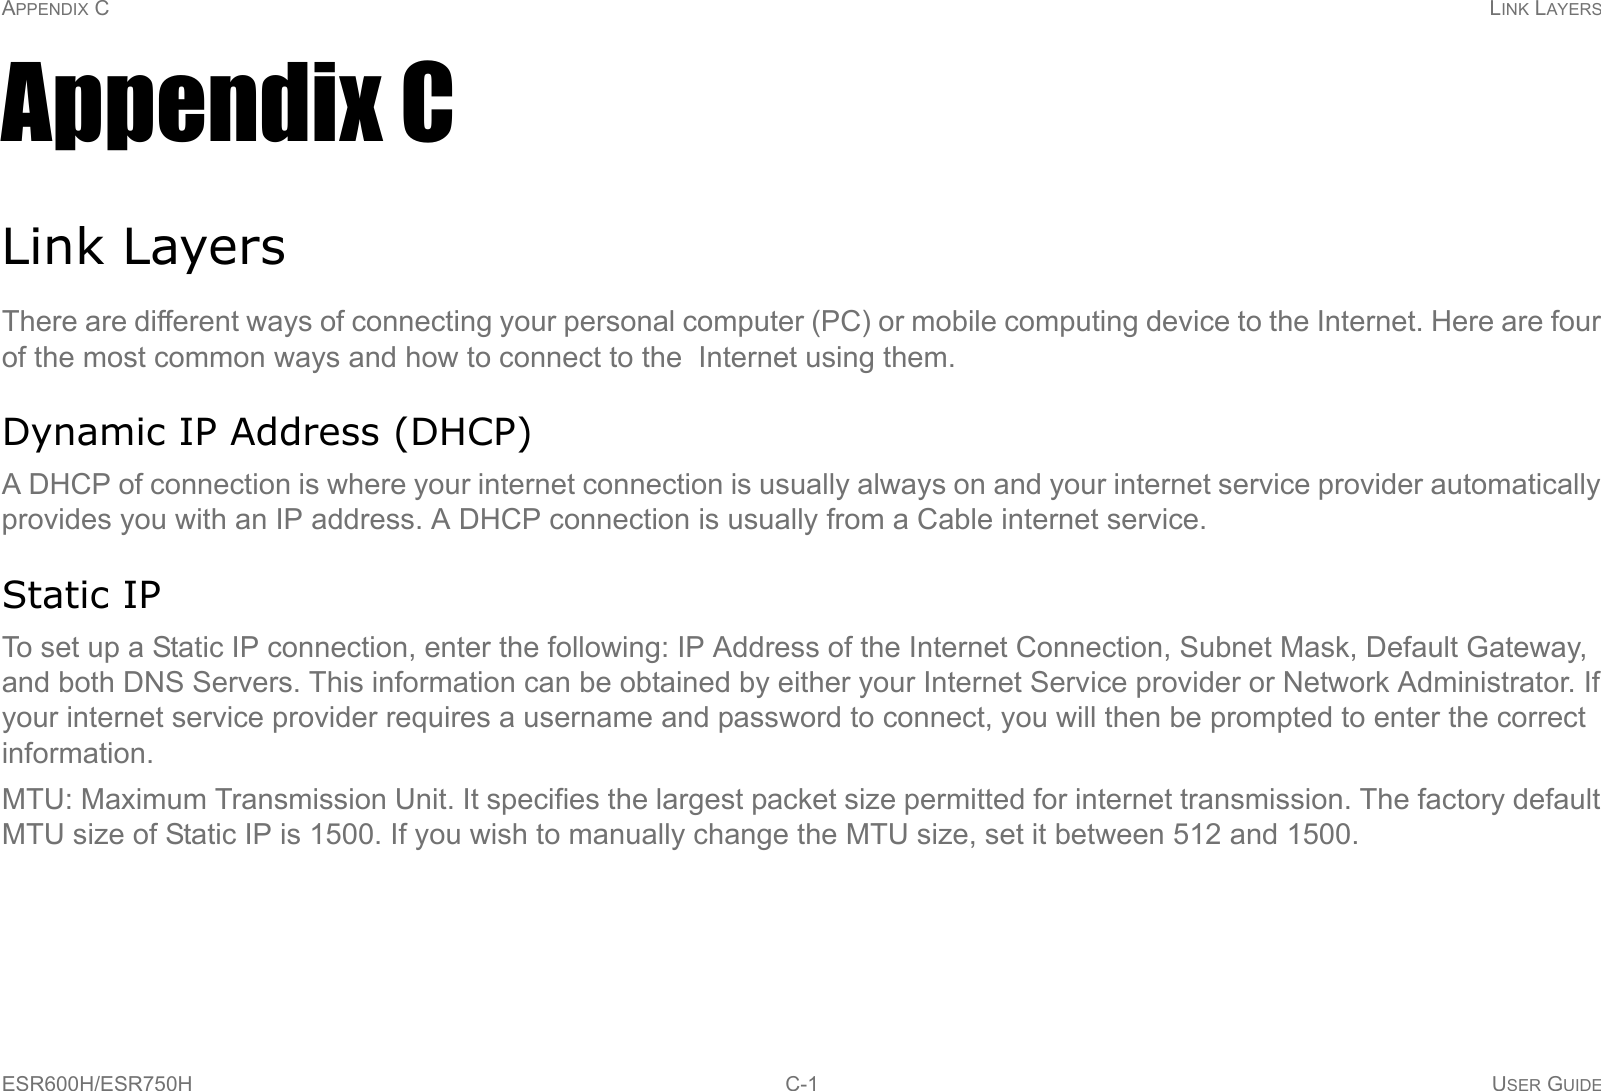 APPENDIX C LINK LAYERSESR600H/ESR750H C-1 USER GUIDEAppendix CLink LayersThere are different ways of connecting your personal computer (PC) or mobile computing device to the Internet. Here are four of the most common ways and how to connect to the  Internet using them.Dynamic IP Address (DHCP)A DHCP of connection is where your internet connection is usually always on and your internet service provider automatically provides you with an IP address. A DHCP connection is usually from a Cable internet service.Static IPTo set up a Static IP connection, enter the following: IP Address of the Internet Connection, Subnet Mask, Default Gateway, and both DNS Servers. This information can be obtained by either your Internet Service provider or Network Administrator. If your internet service provider requires a username and password to connect, you will then be prompted to enter the correct information.MTU: Maximum Transmission Unit. It specifies the largest packet size permitted for internet transmission. The factory default MTU size of Static IP is 1500. If you wish to manually change the MTU size, set it between 512 and 1500. 